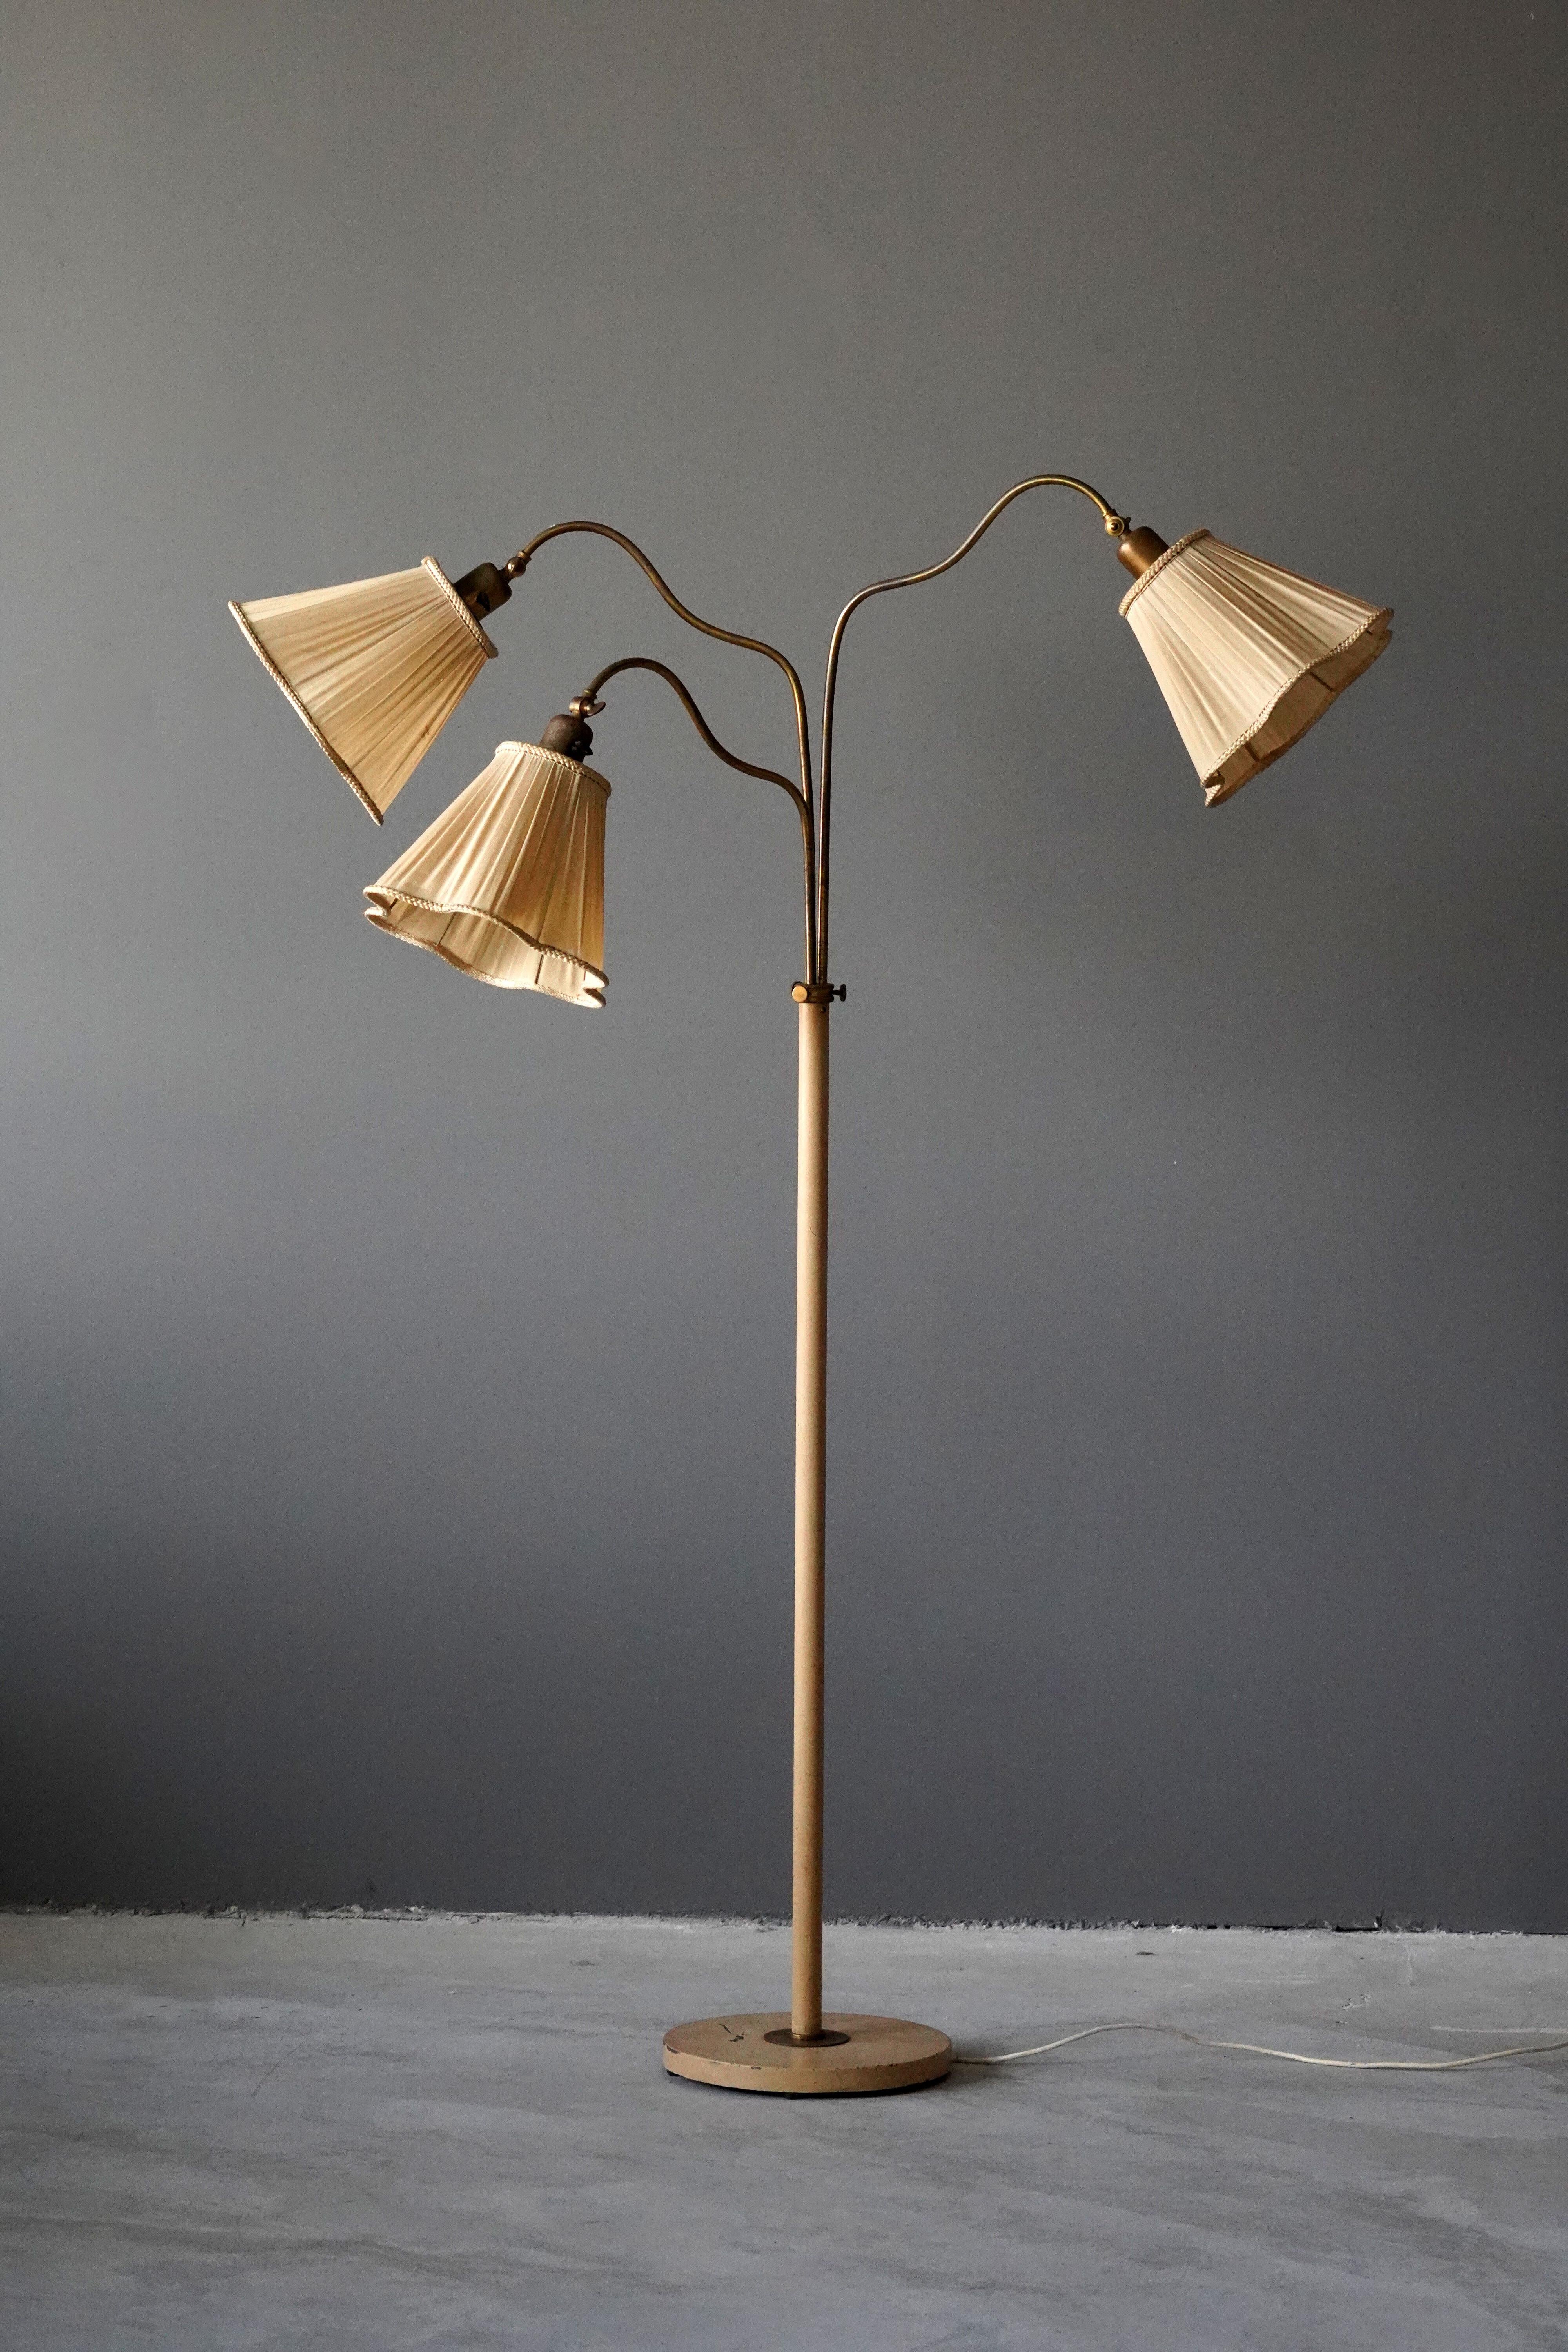 An adjustable three-armed functionalist floor lamp. With adjustable arms. Vintage lampshades. Original cream white paint. 

Dimensions variable. Stated measurements as illustrated.

Other designers of the period include Josef Frank, Paavo